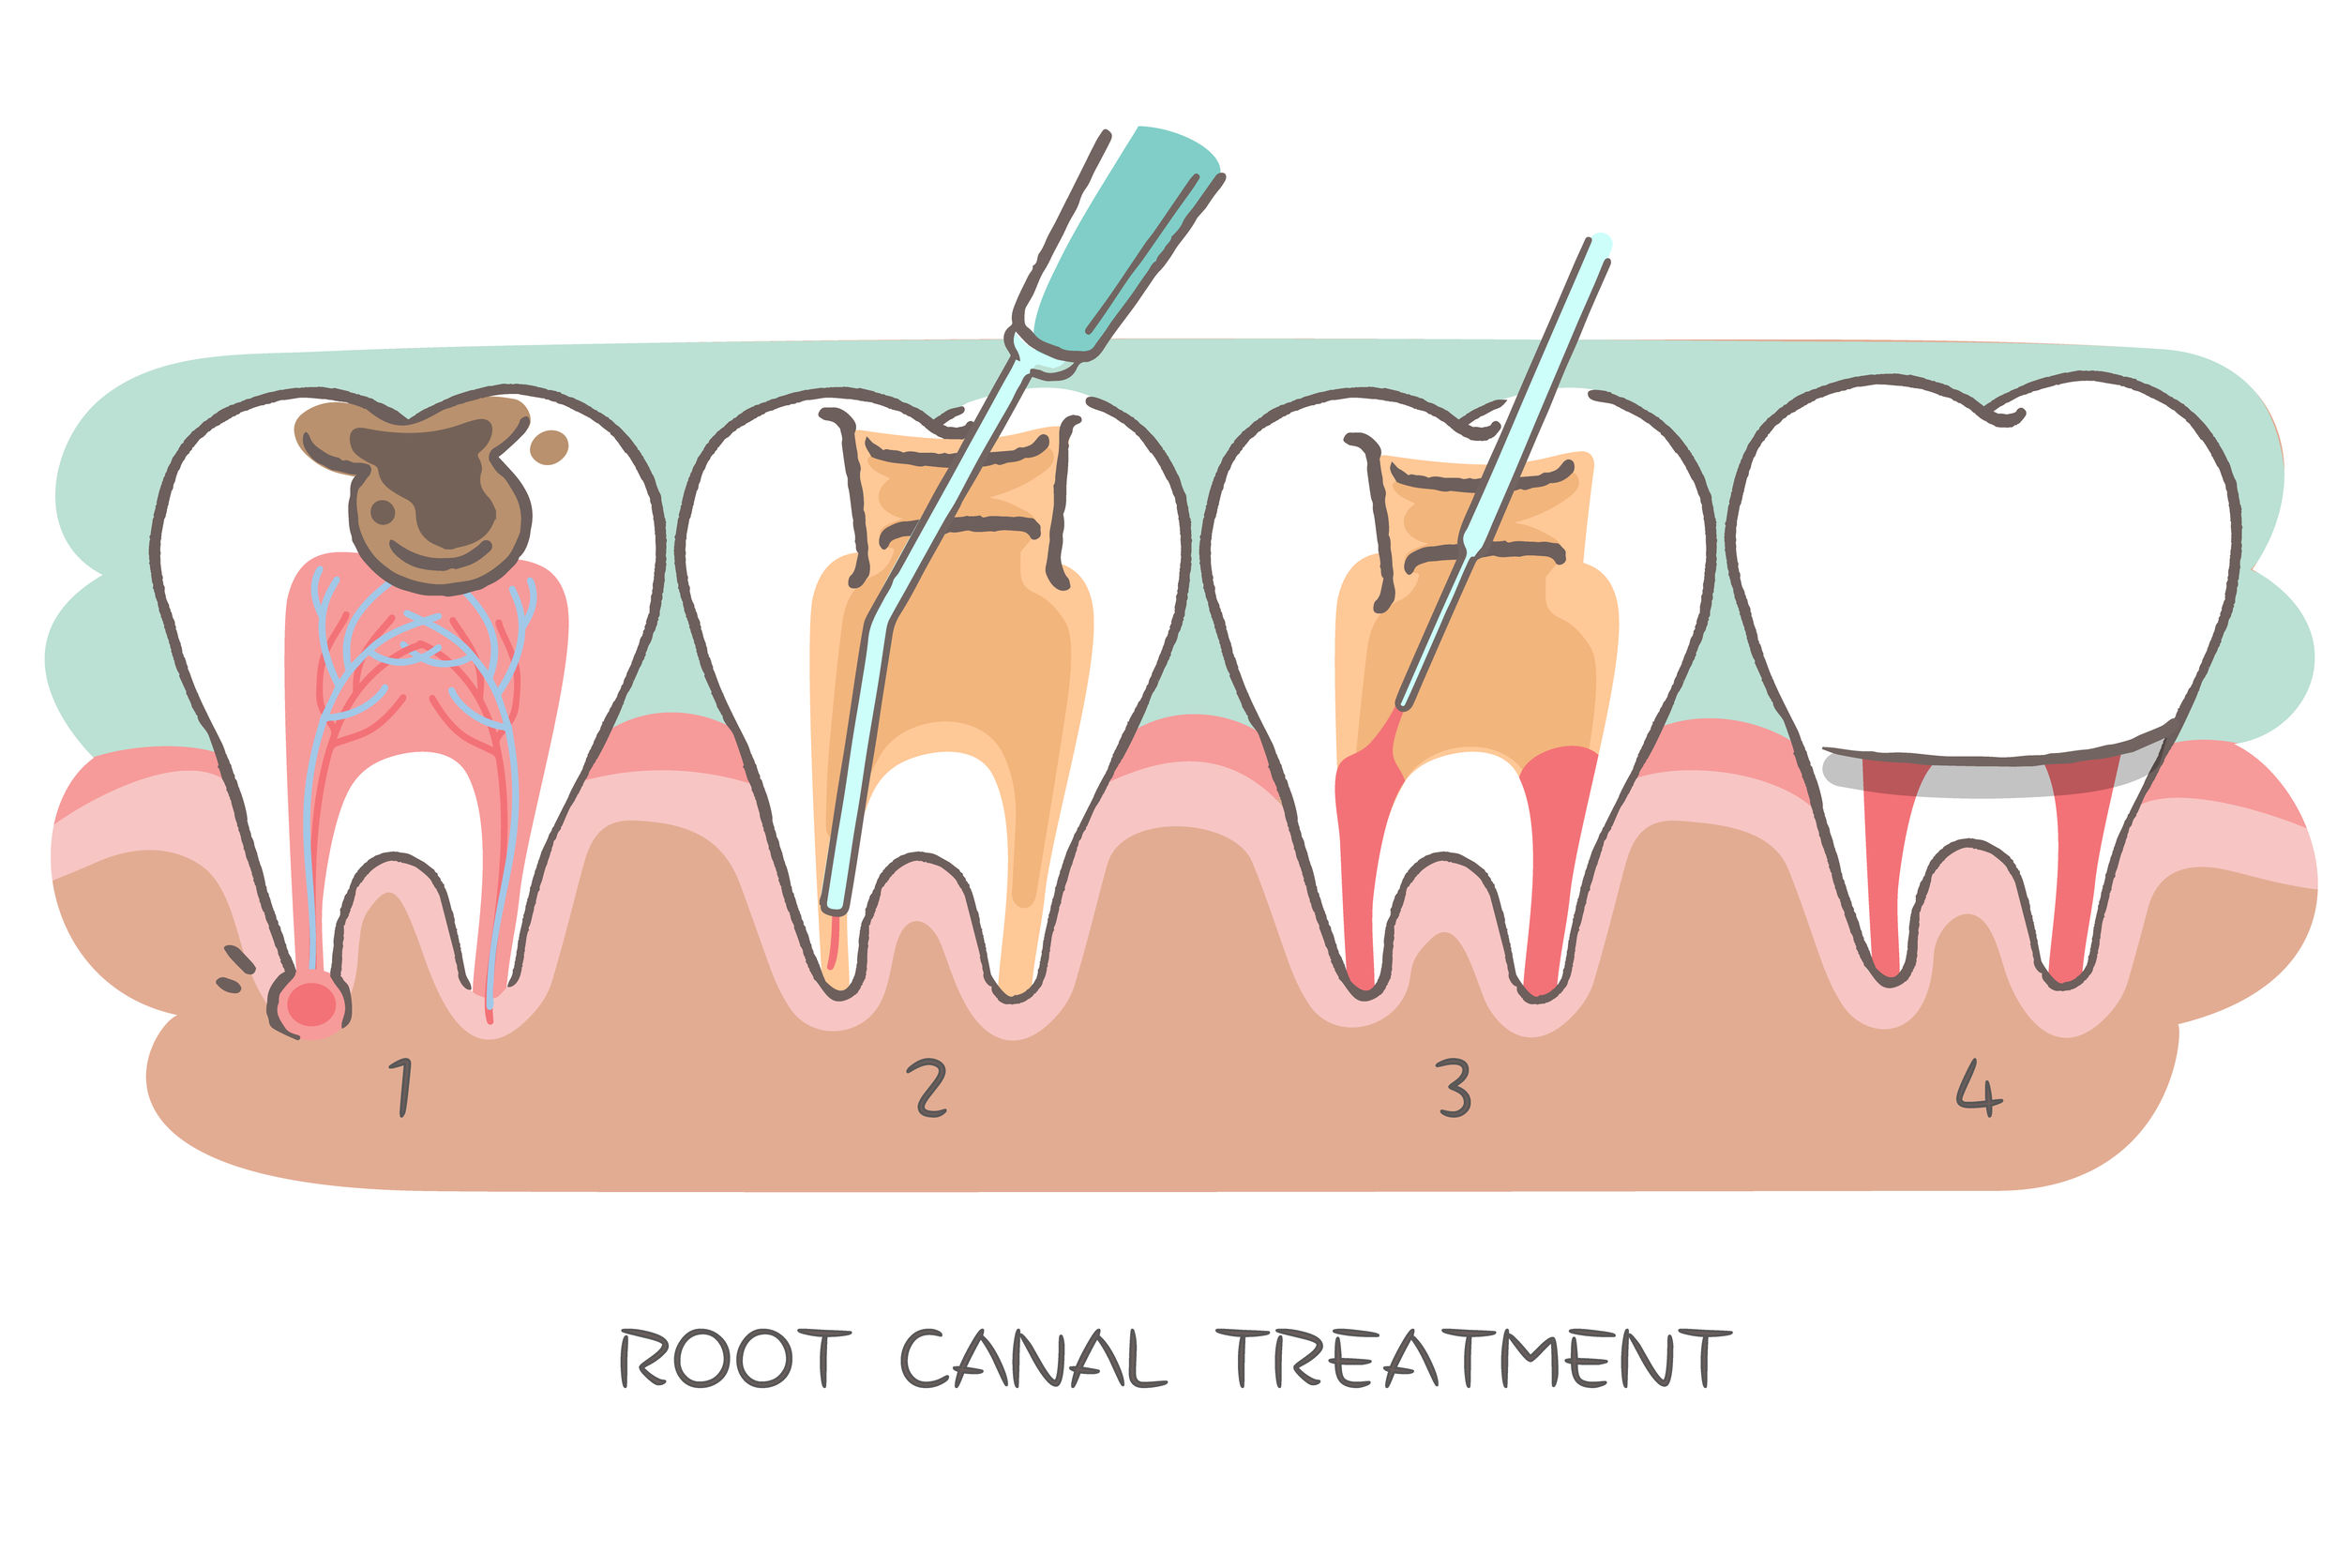 What You Need To Know About Getting a Root Canal